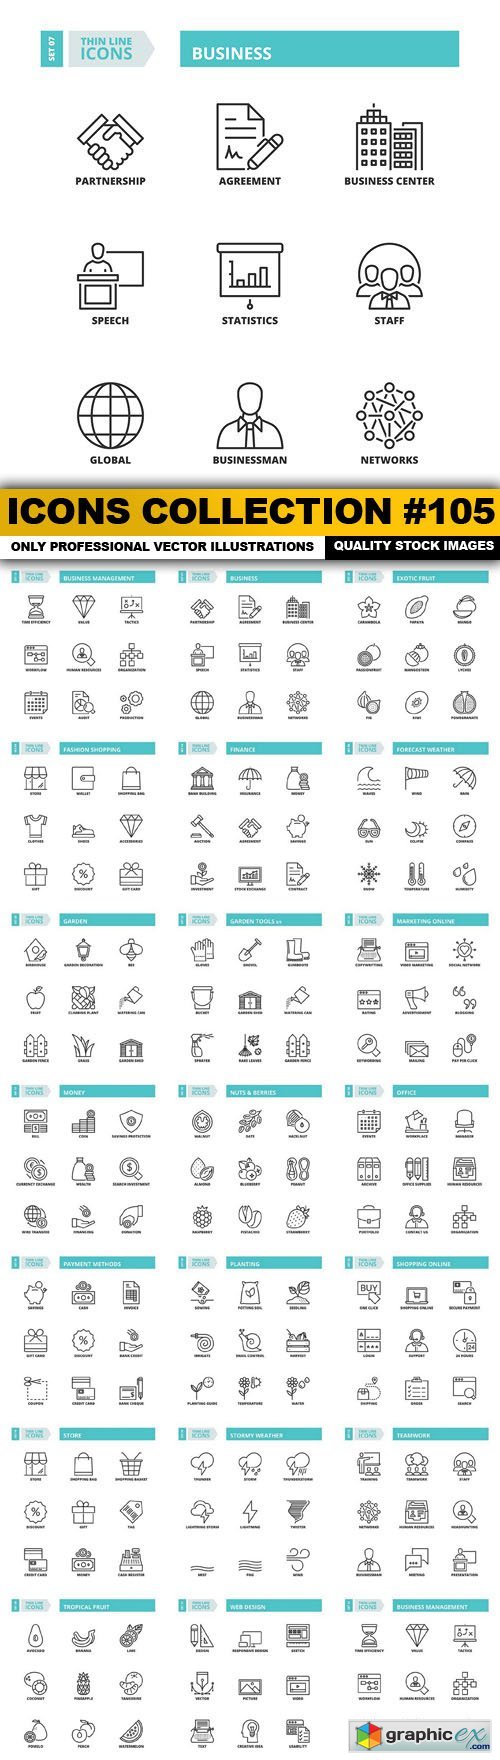 Icons Collection #105 - 20 Vector